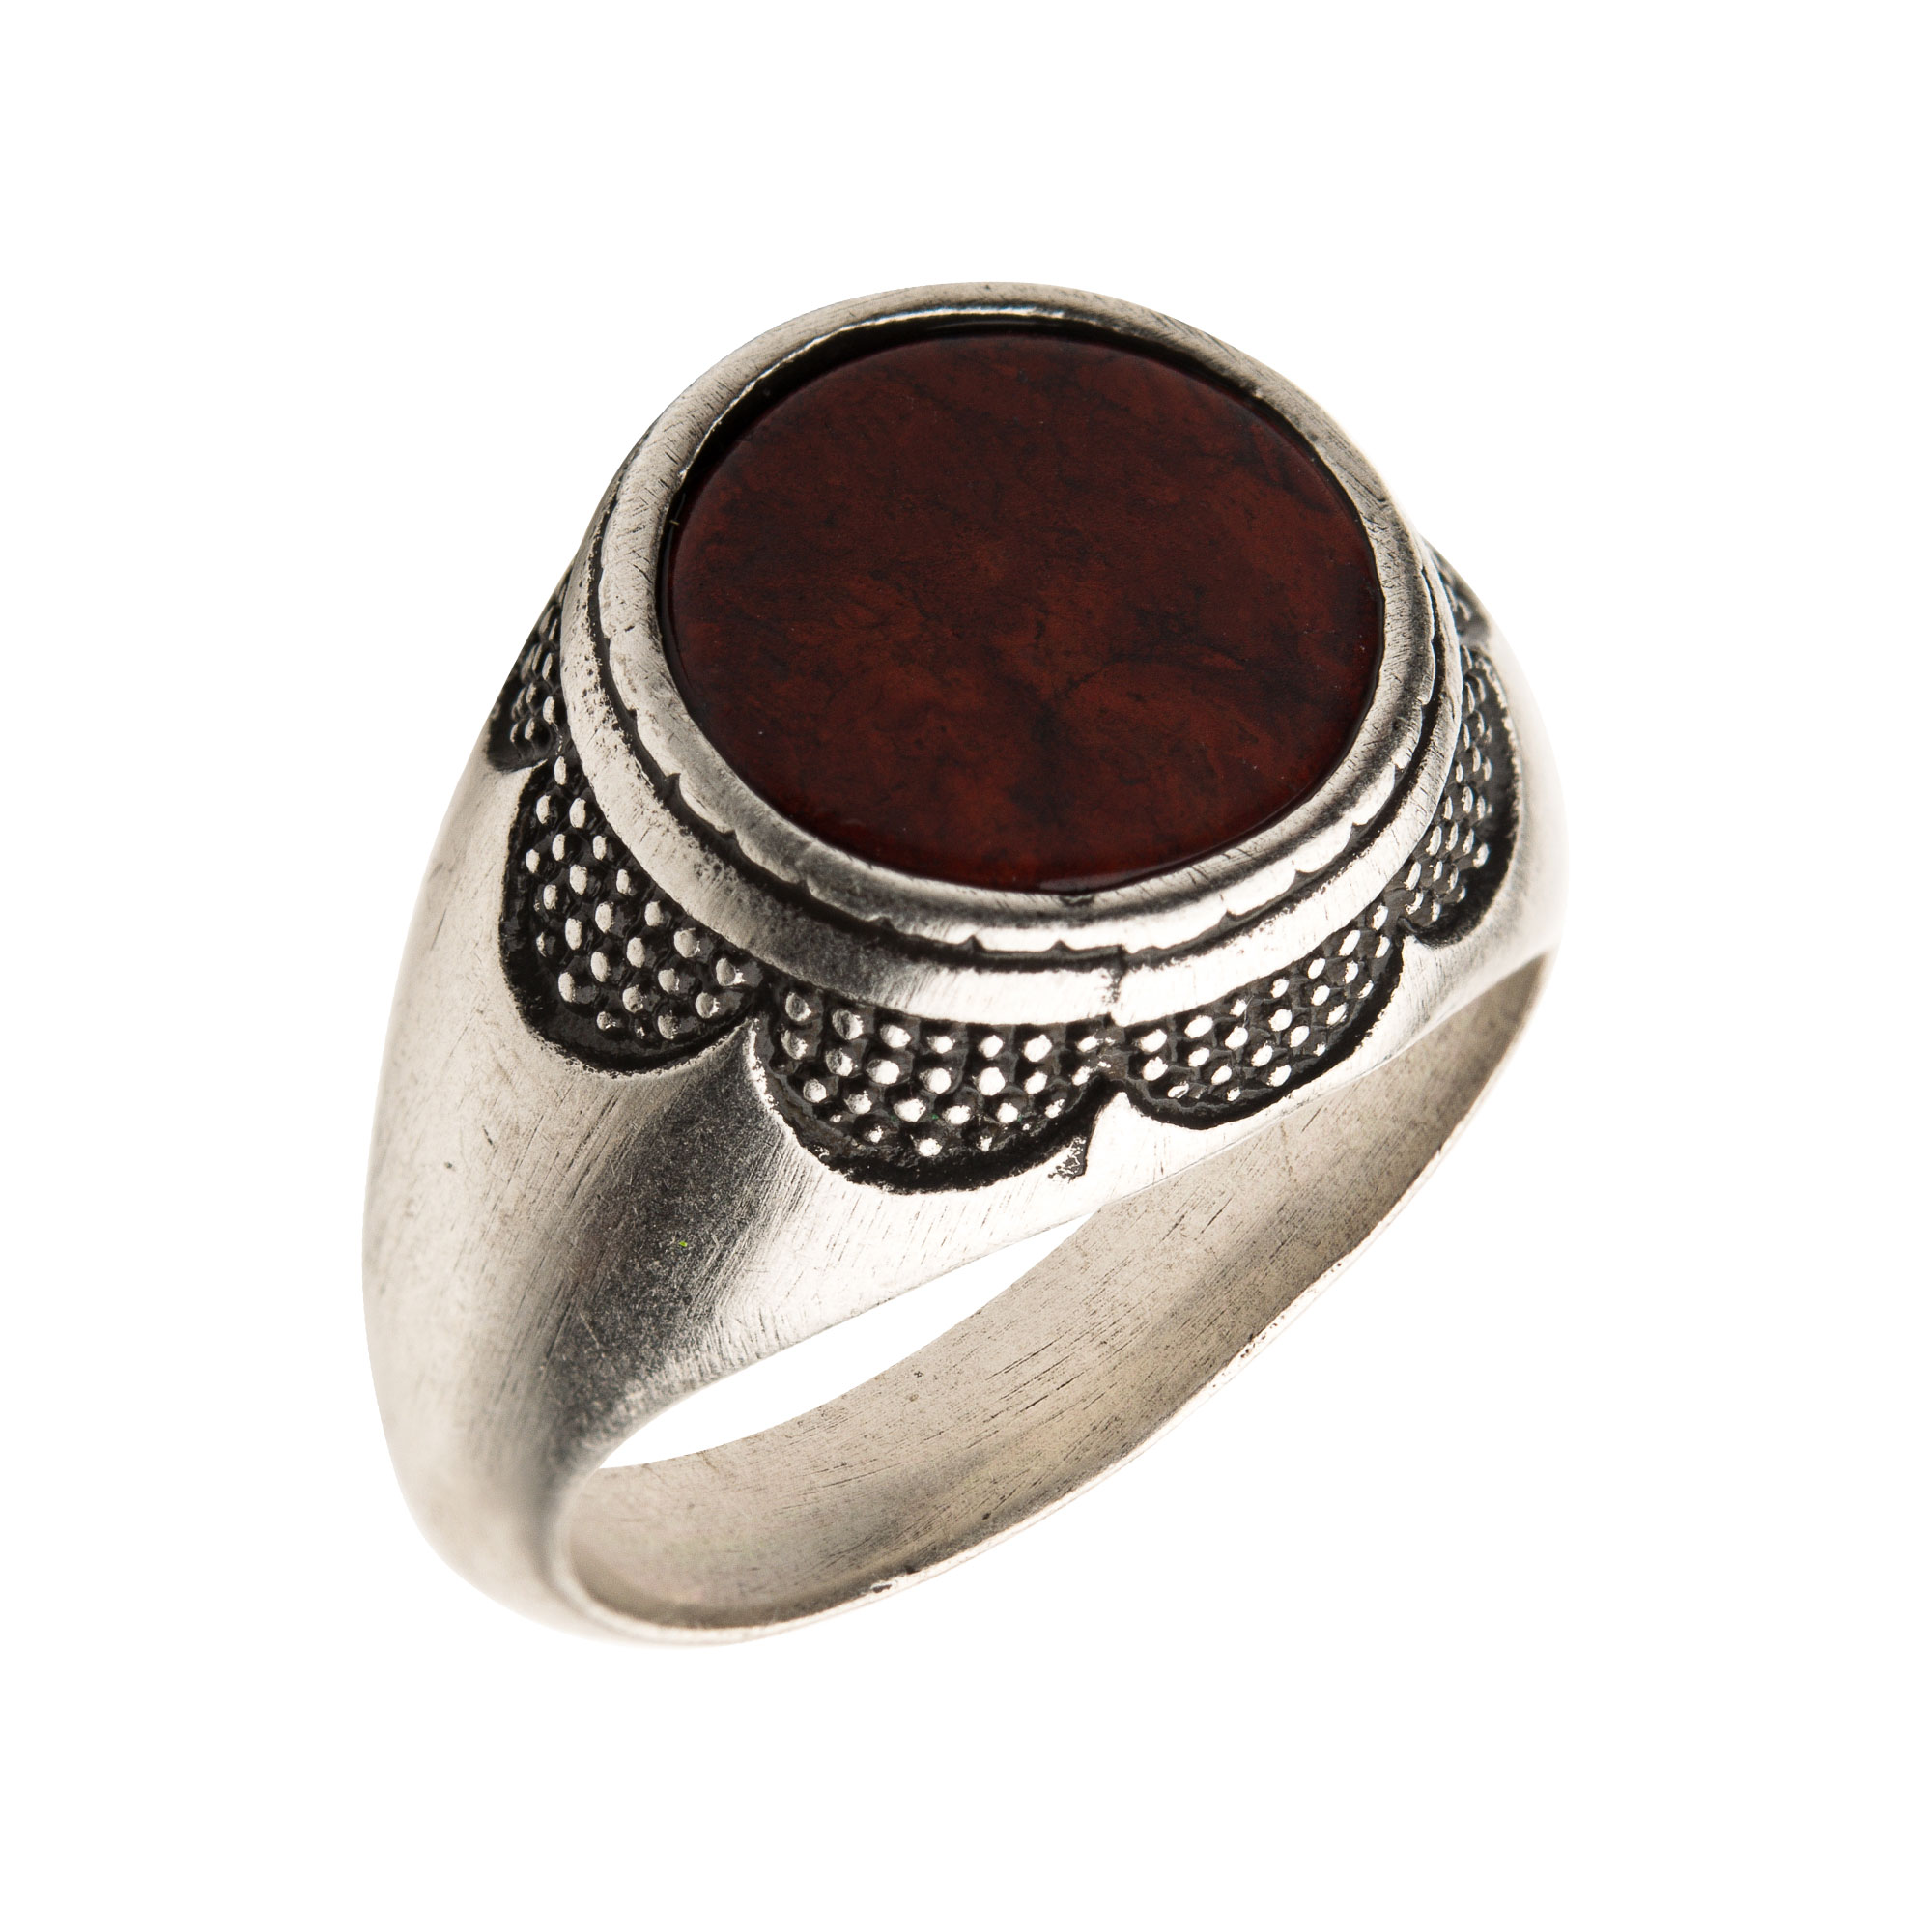 Stainless Steel Silver Plated with Red Jasper Stone Ring Midtown Diamonds Reno, NV